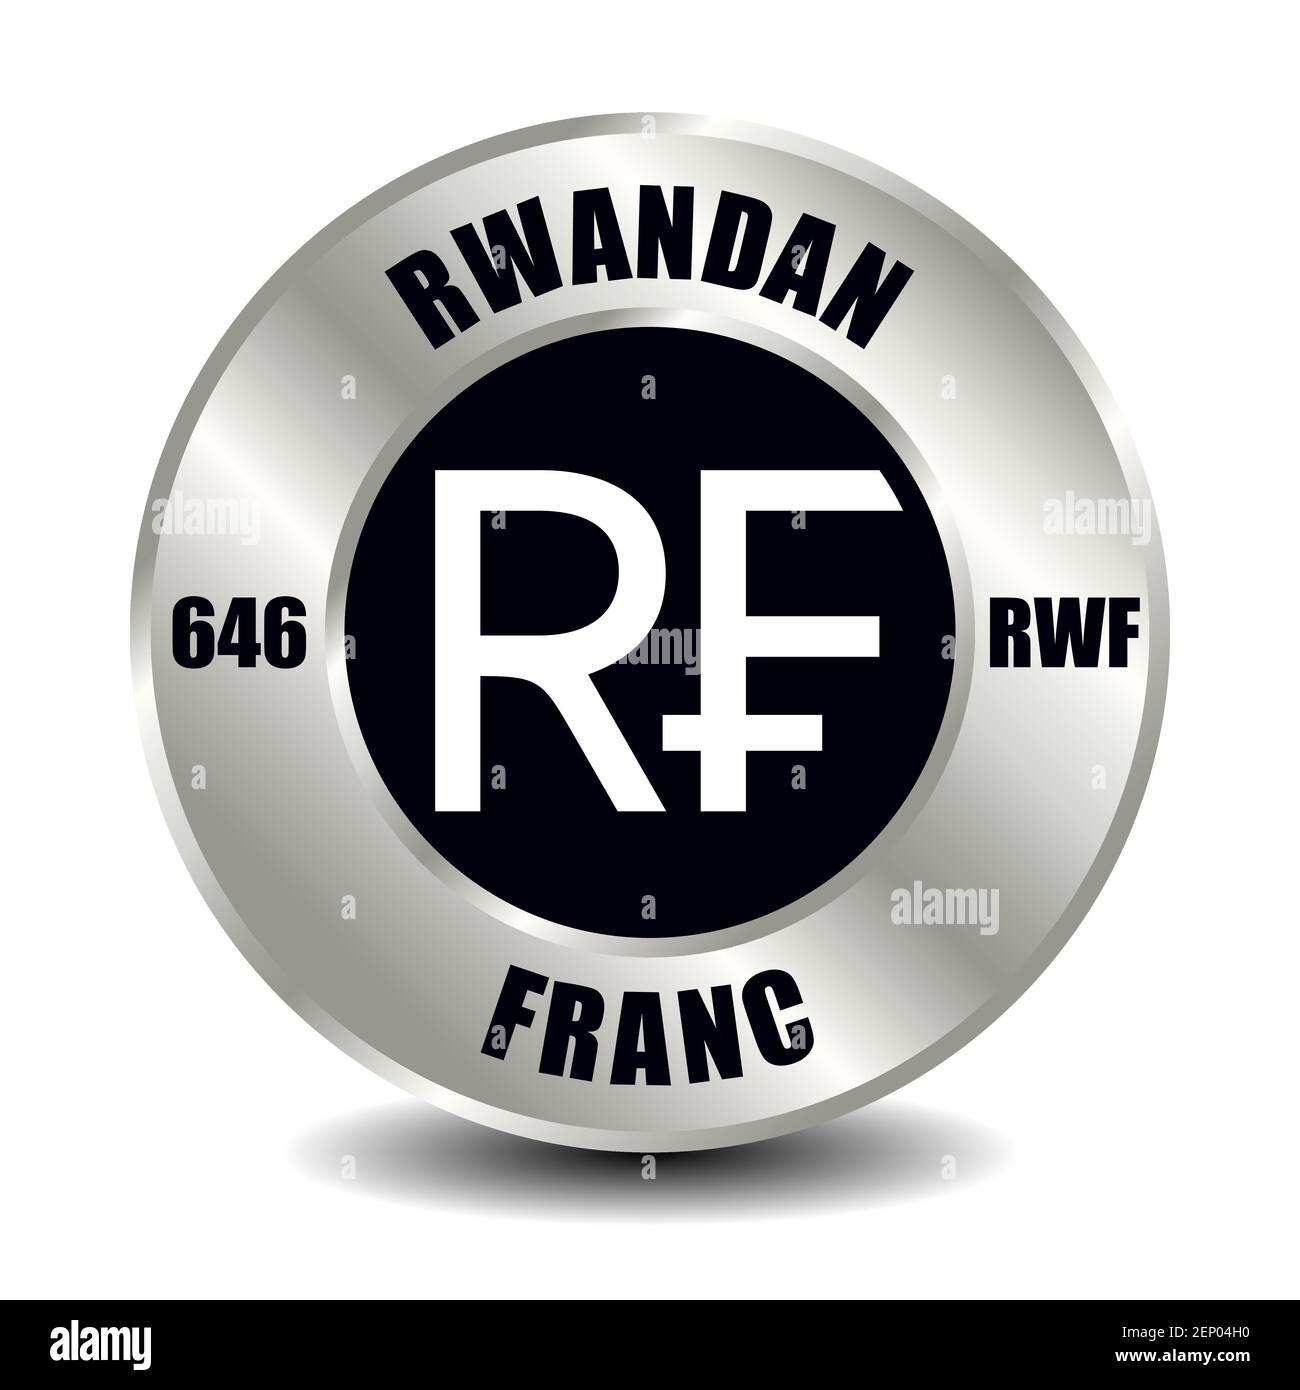 Rwanda money icon isolated on round silver coin. Vector sign of currency symbol with international ISO code and abbreviation Stock Vector